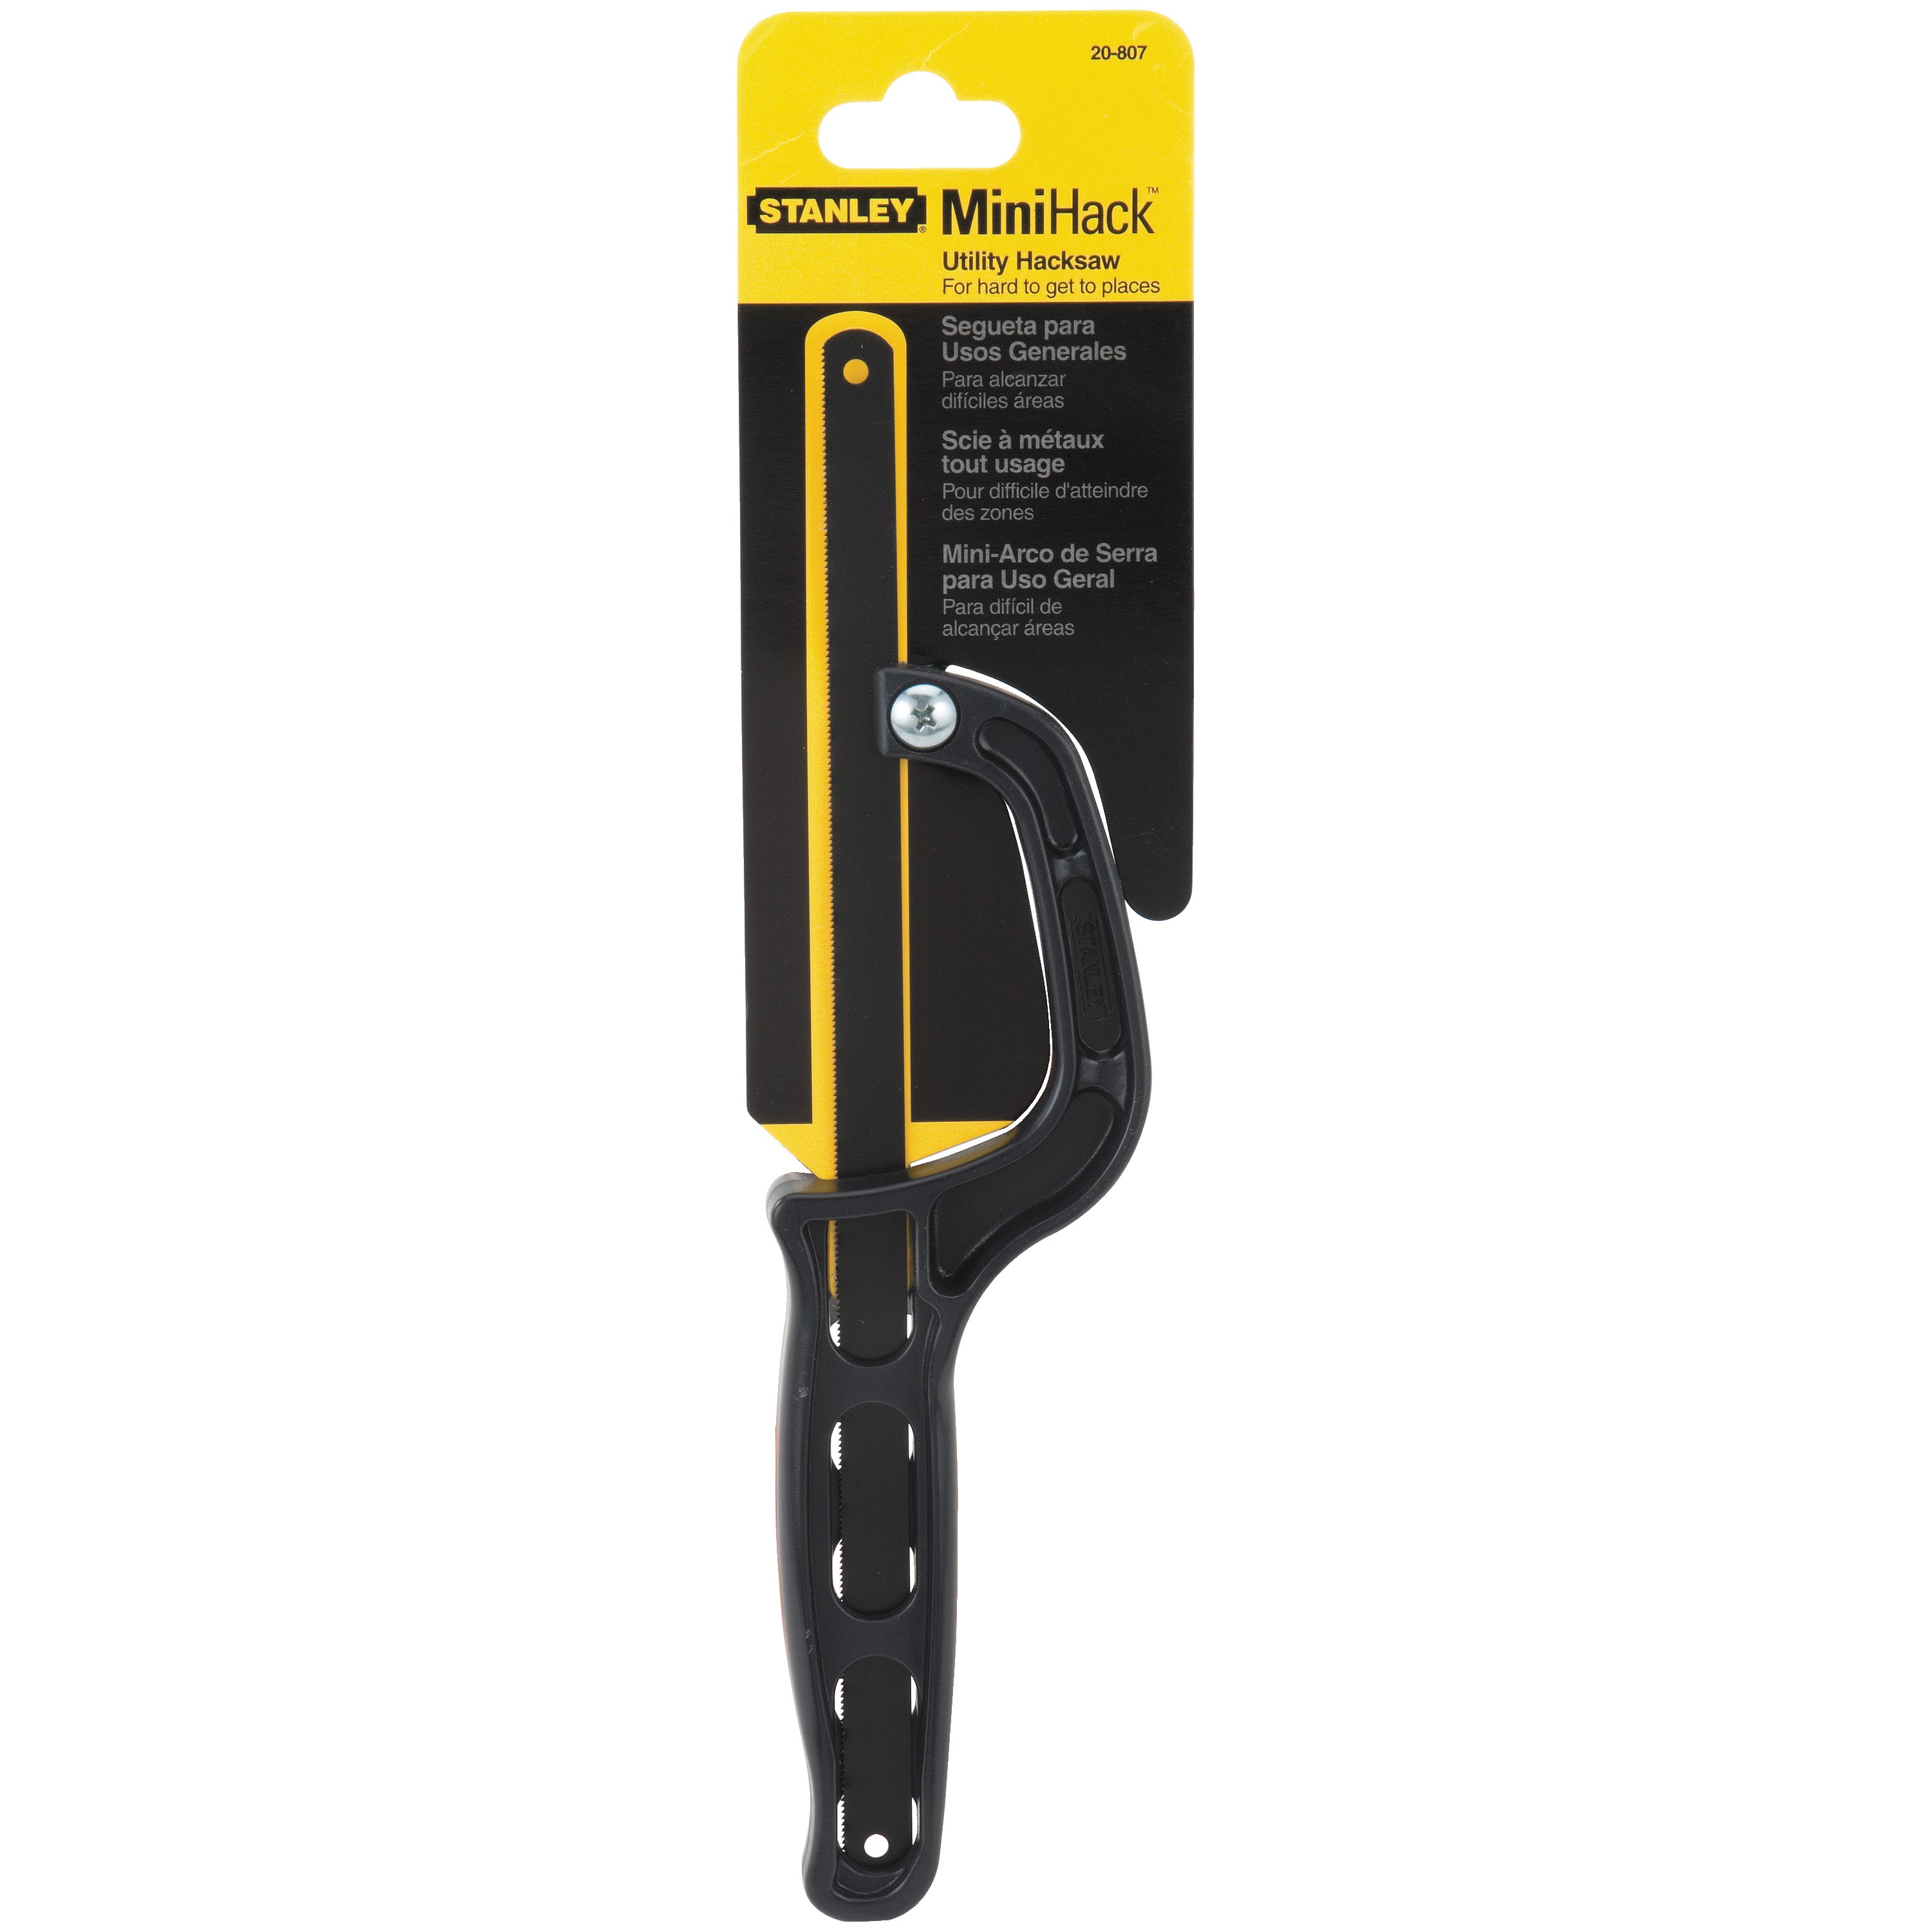 Stanley Tools - 10 in MiniHack Saw - 20-807